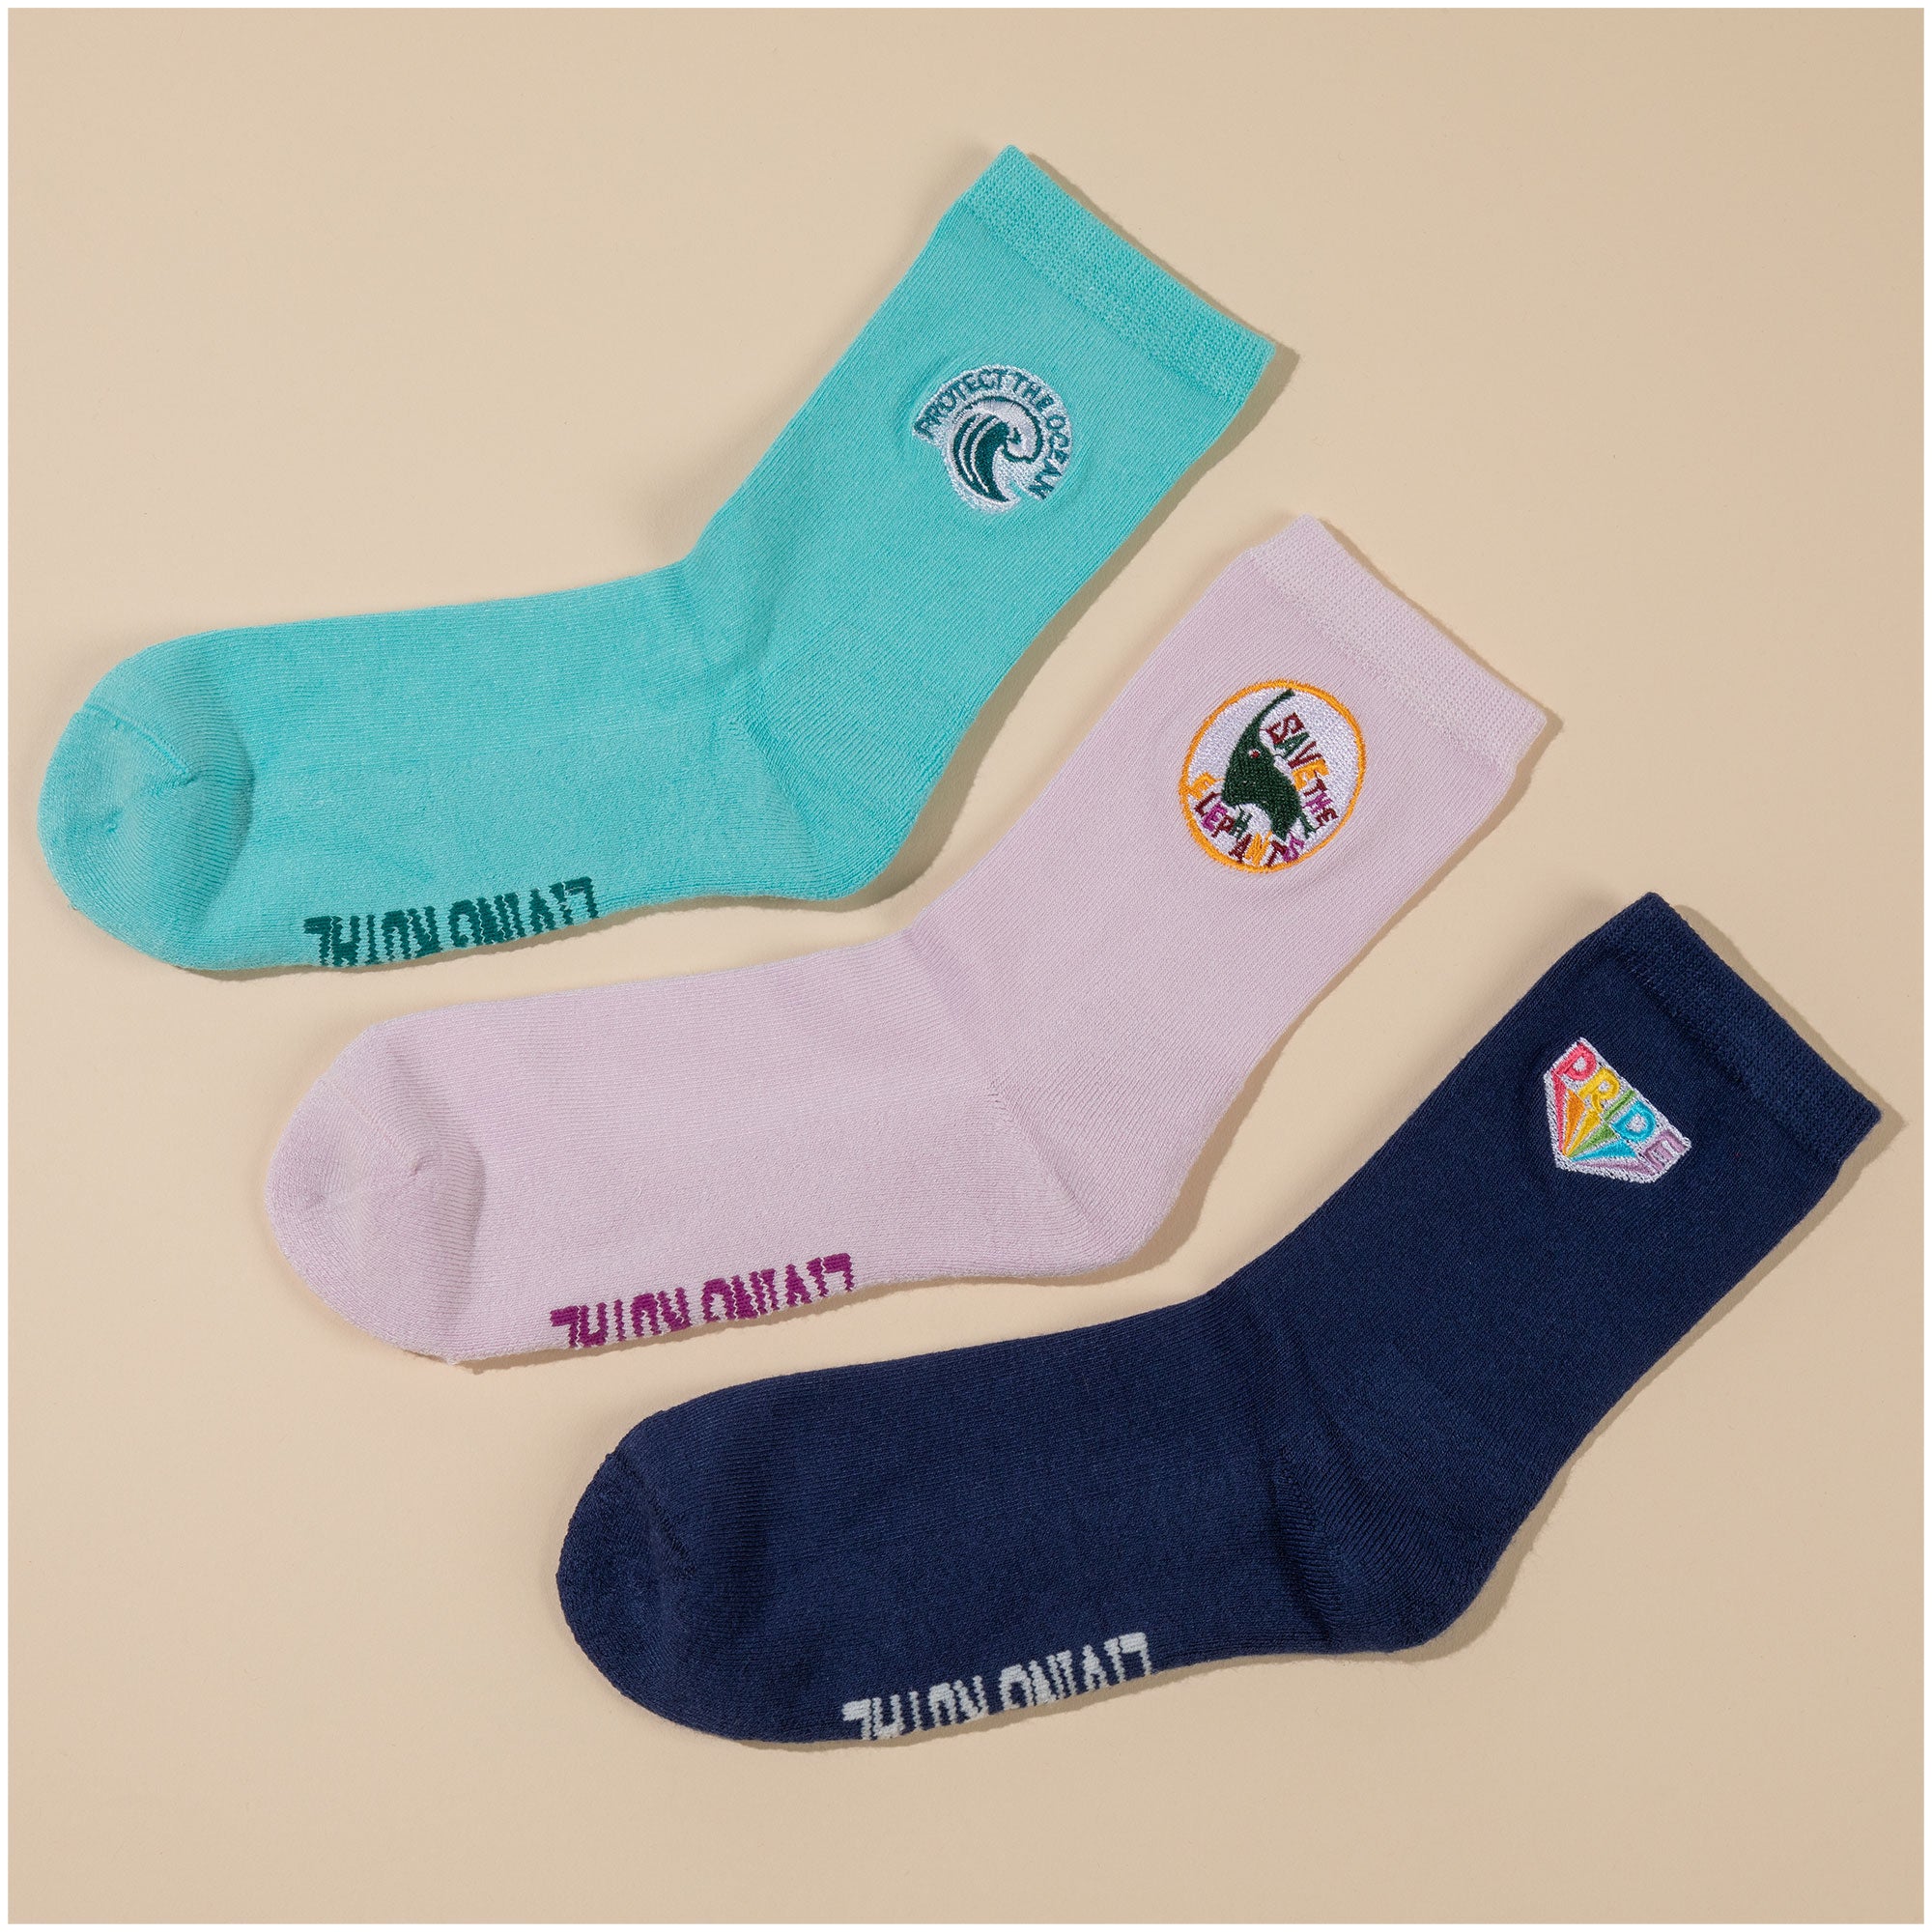 Living Royal Charity Crew Socks - Disaster Relief